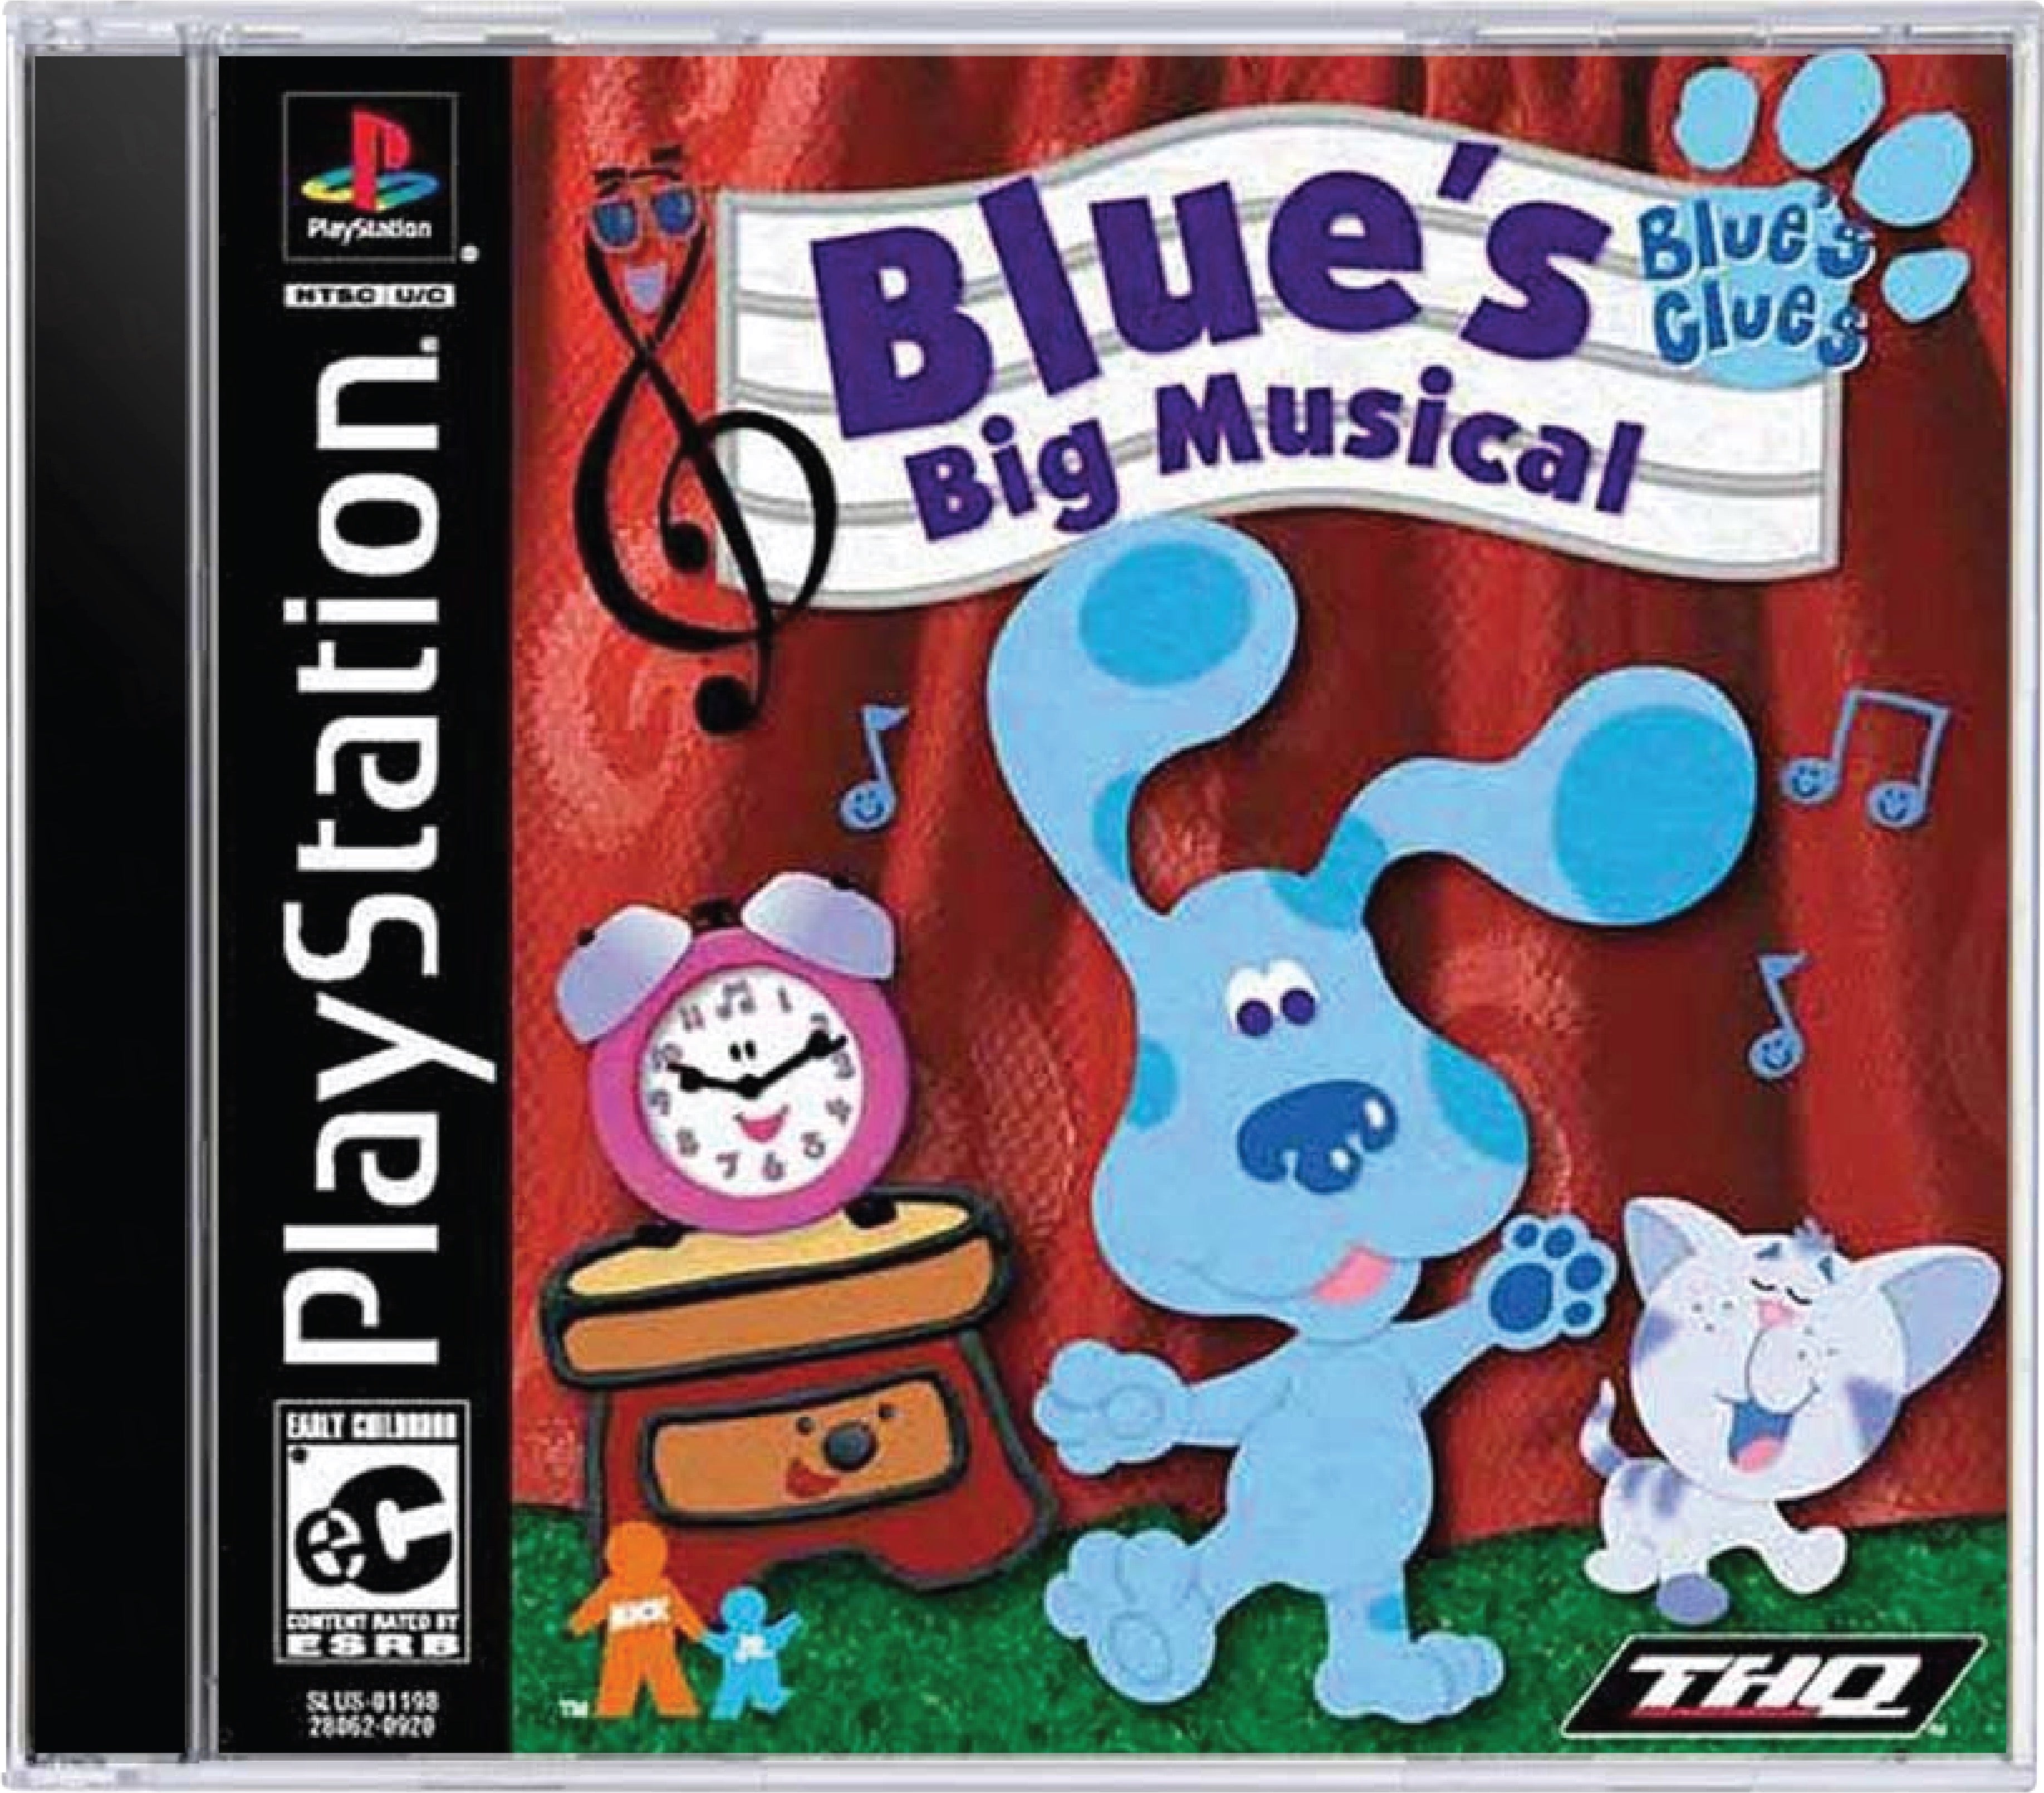 Blue's Clues Blue's Big Musical Cover Art and Product Photo